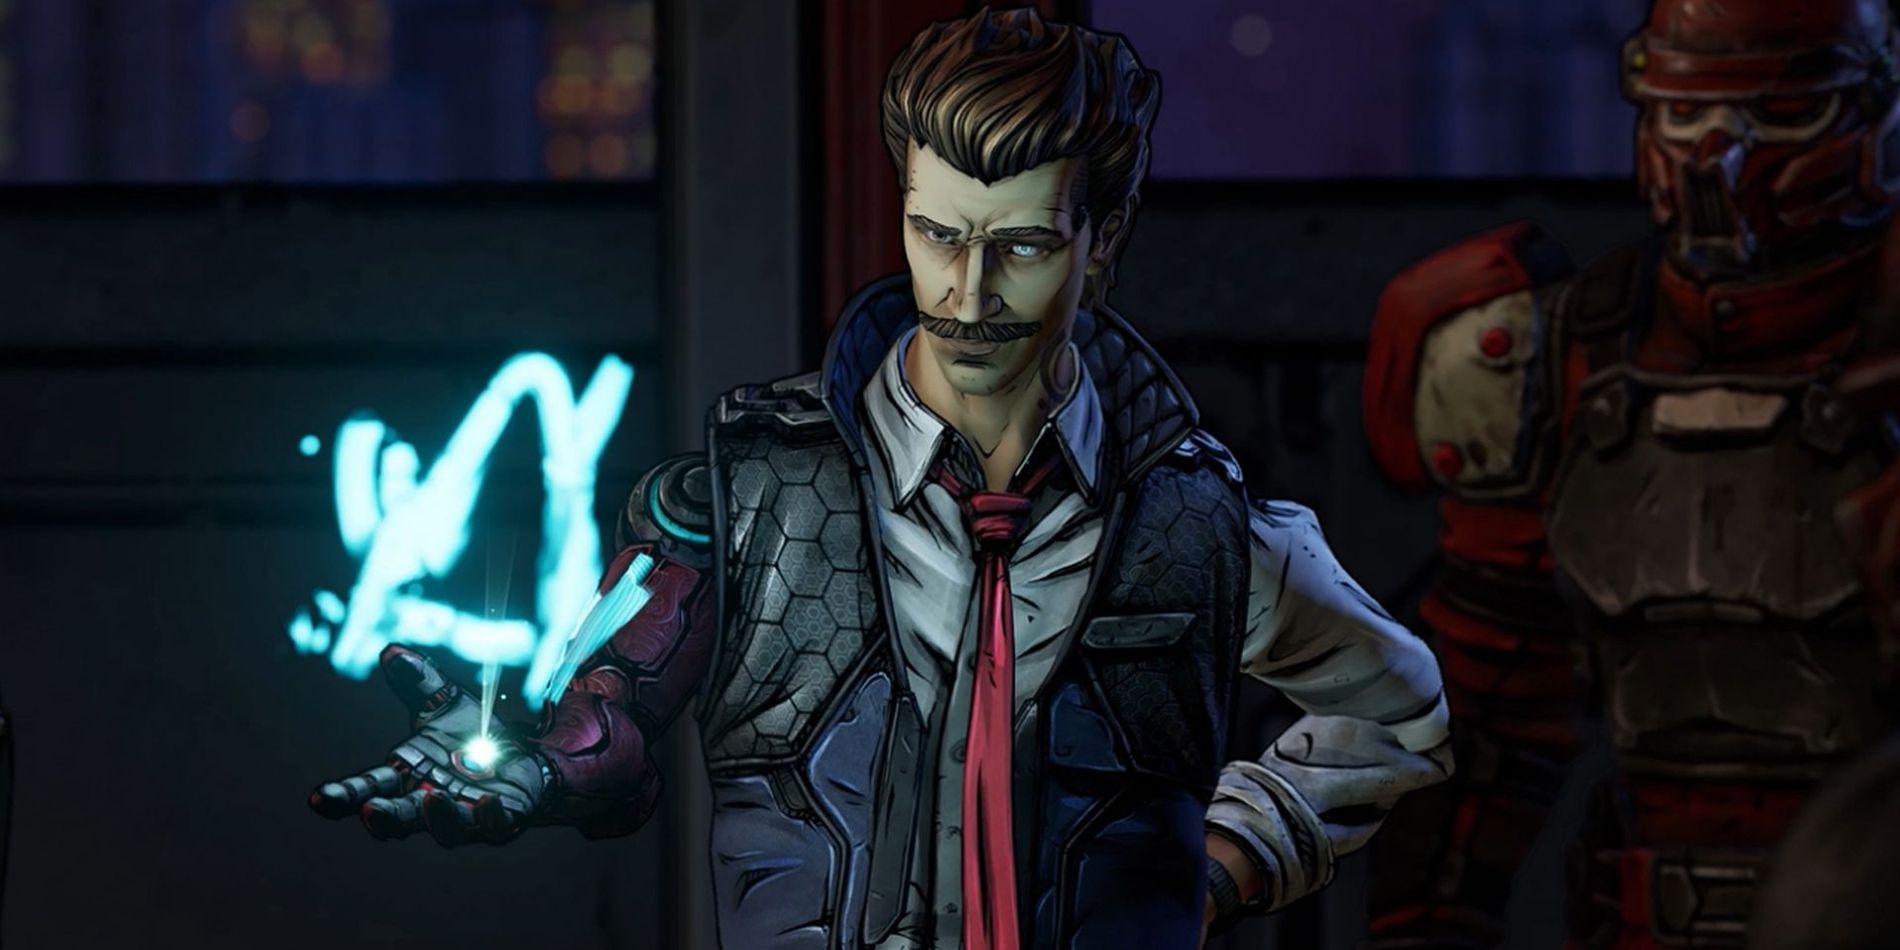 An image of Rhys using his powers in Borderlands 3